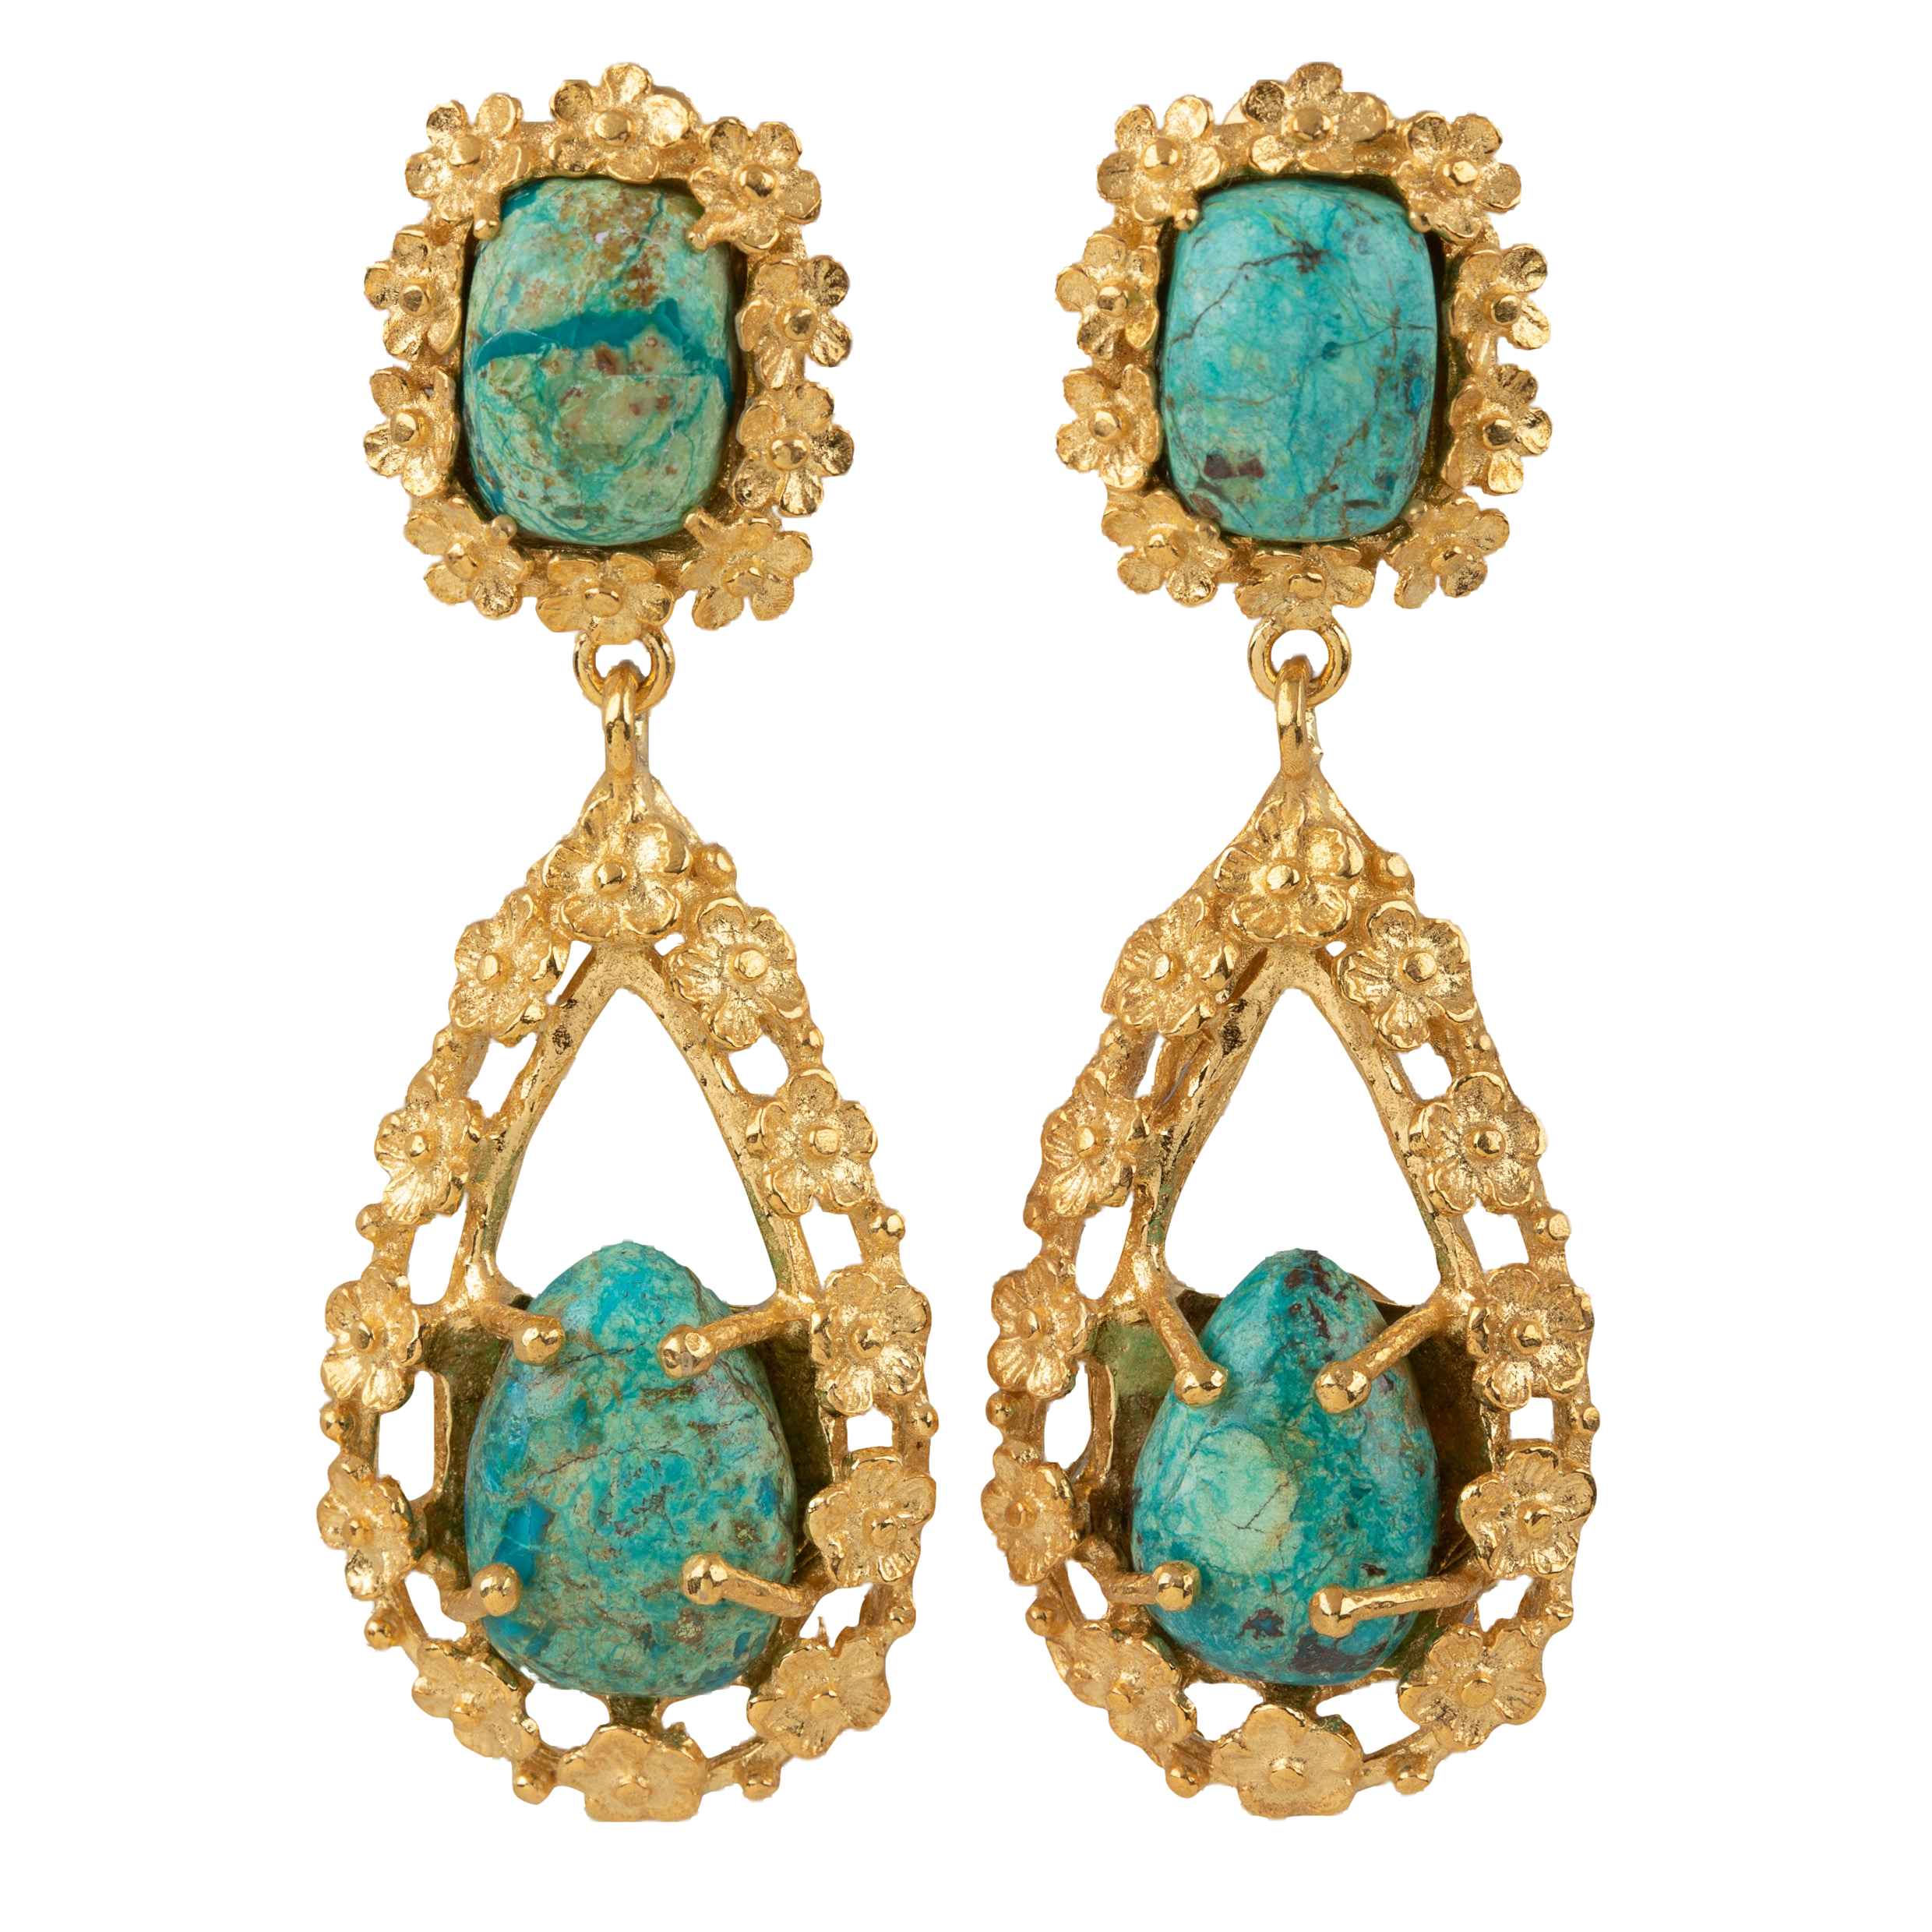 Christie Nicolaides Giselle Earrings Turquoise In Gold